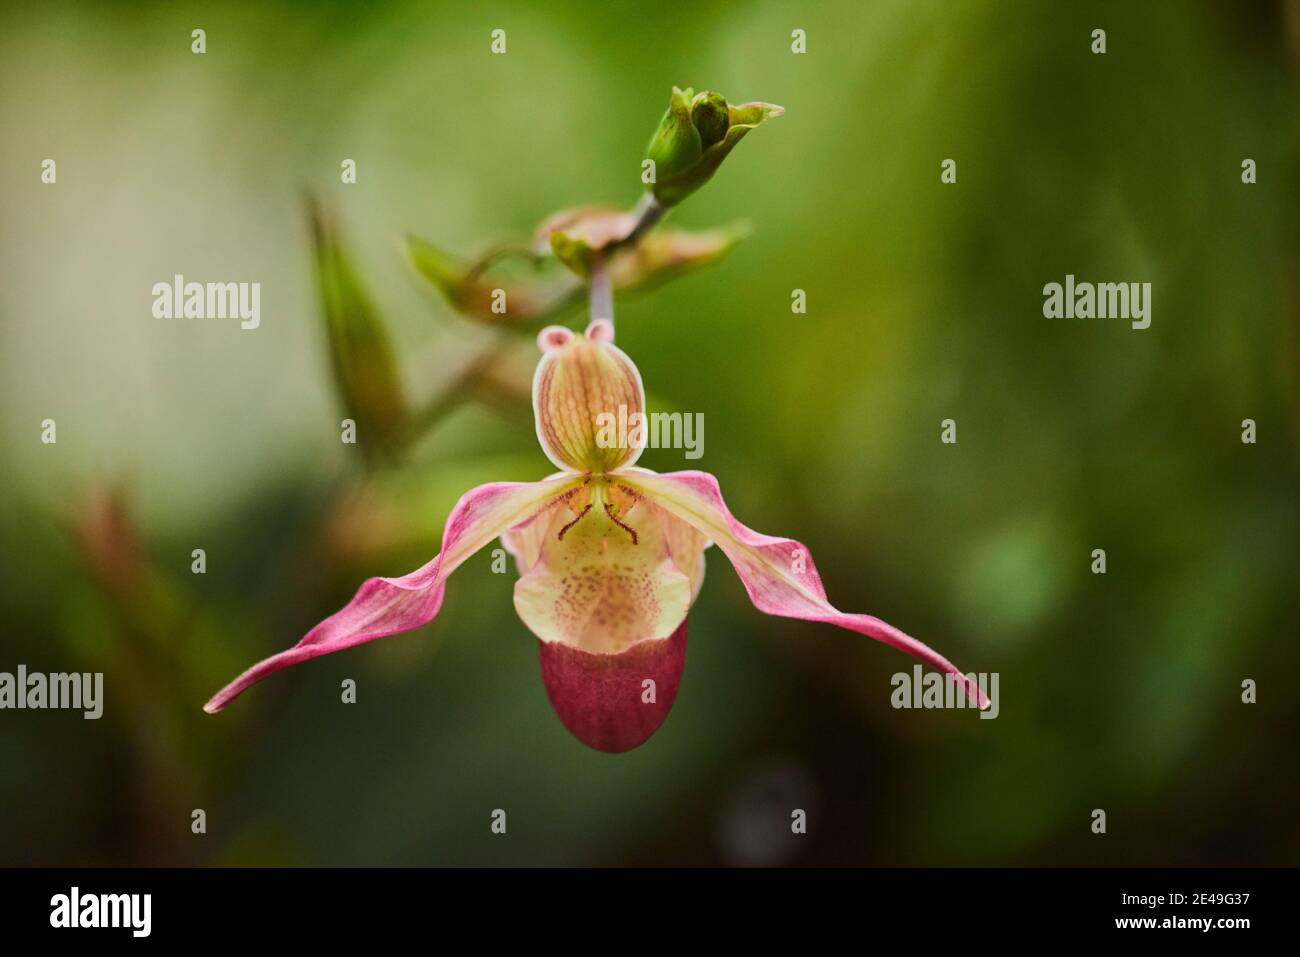 Orchid blossom, Paphiopedilum philippinense, blossom, blooming, Germany Stock Photo